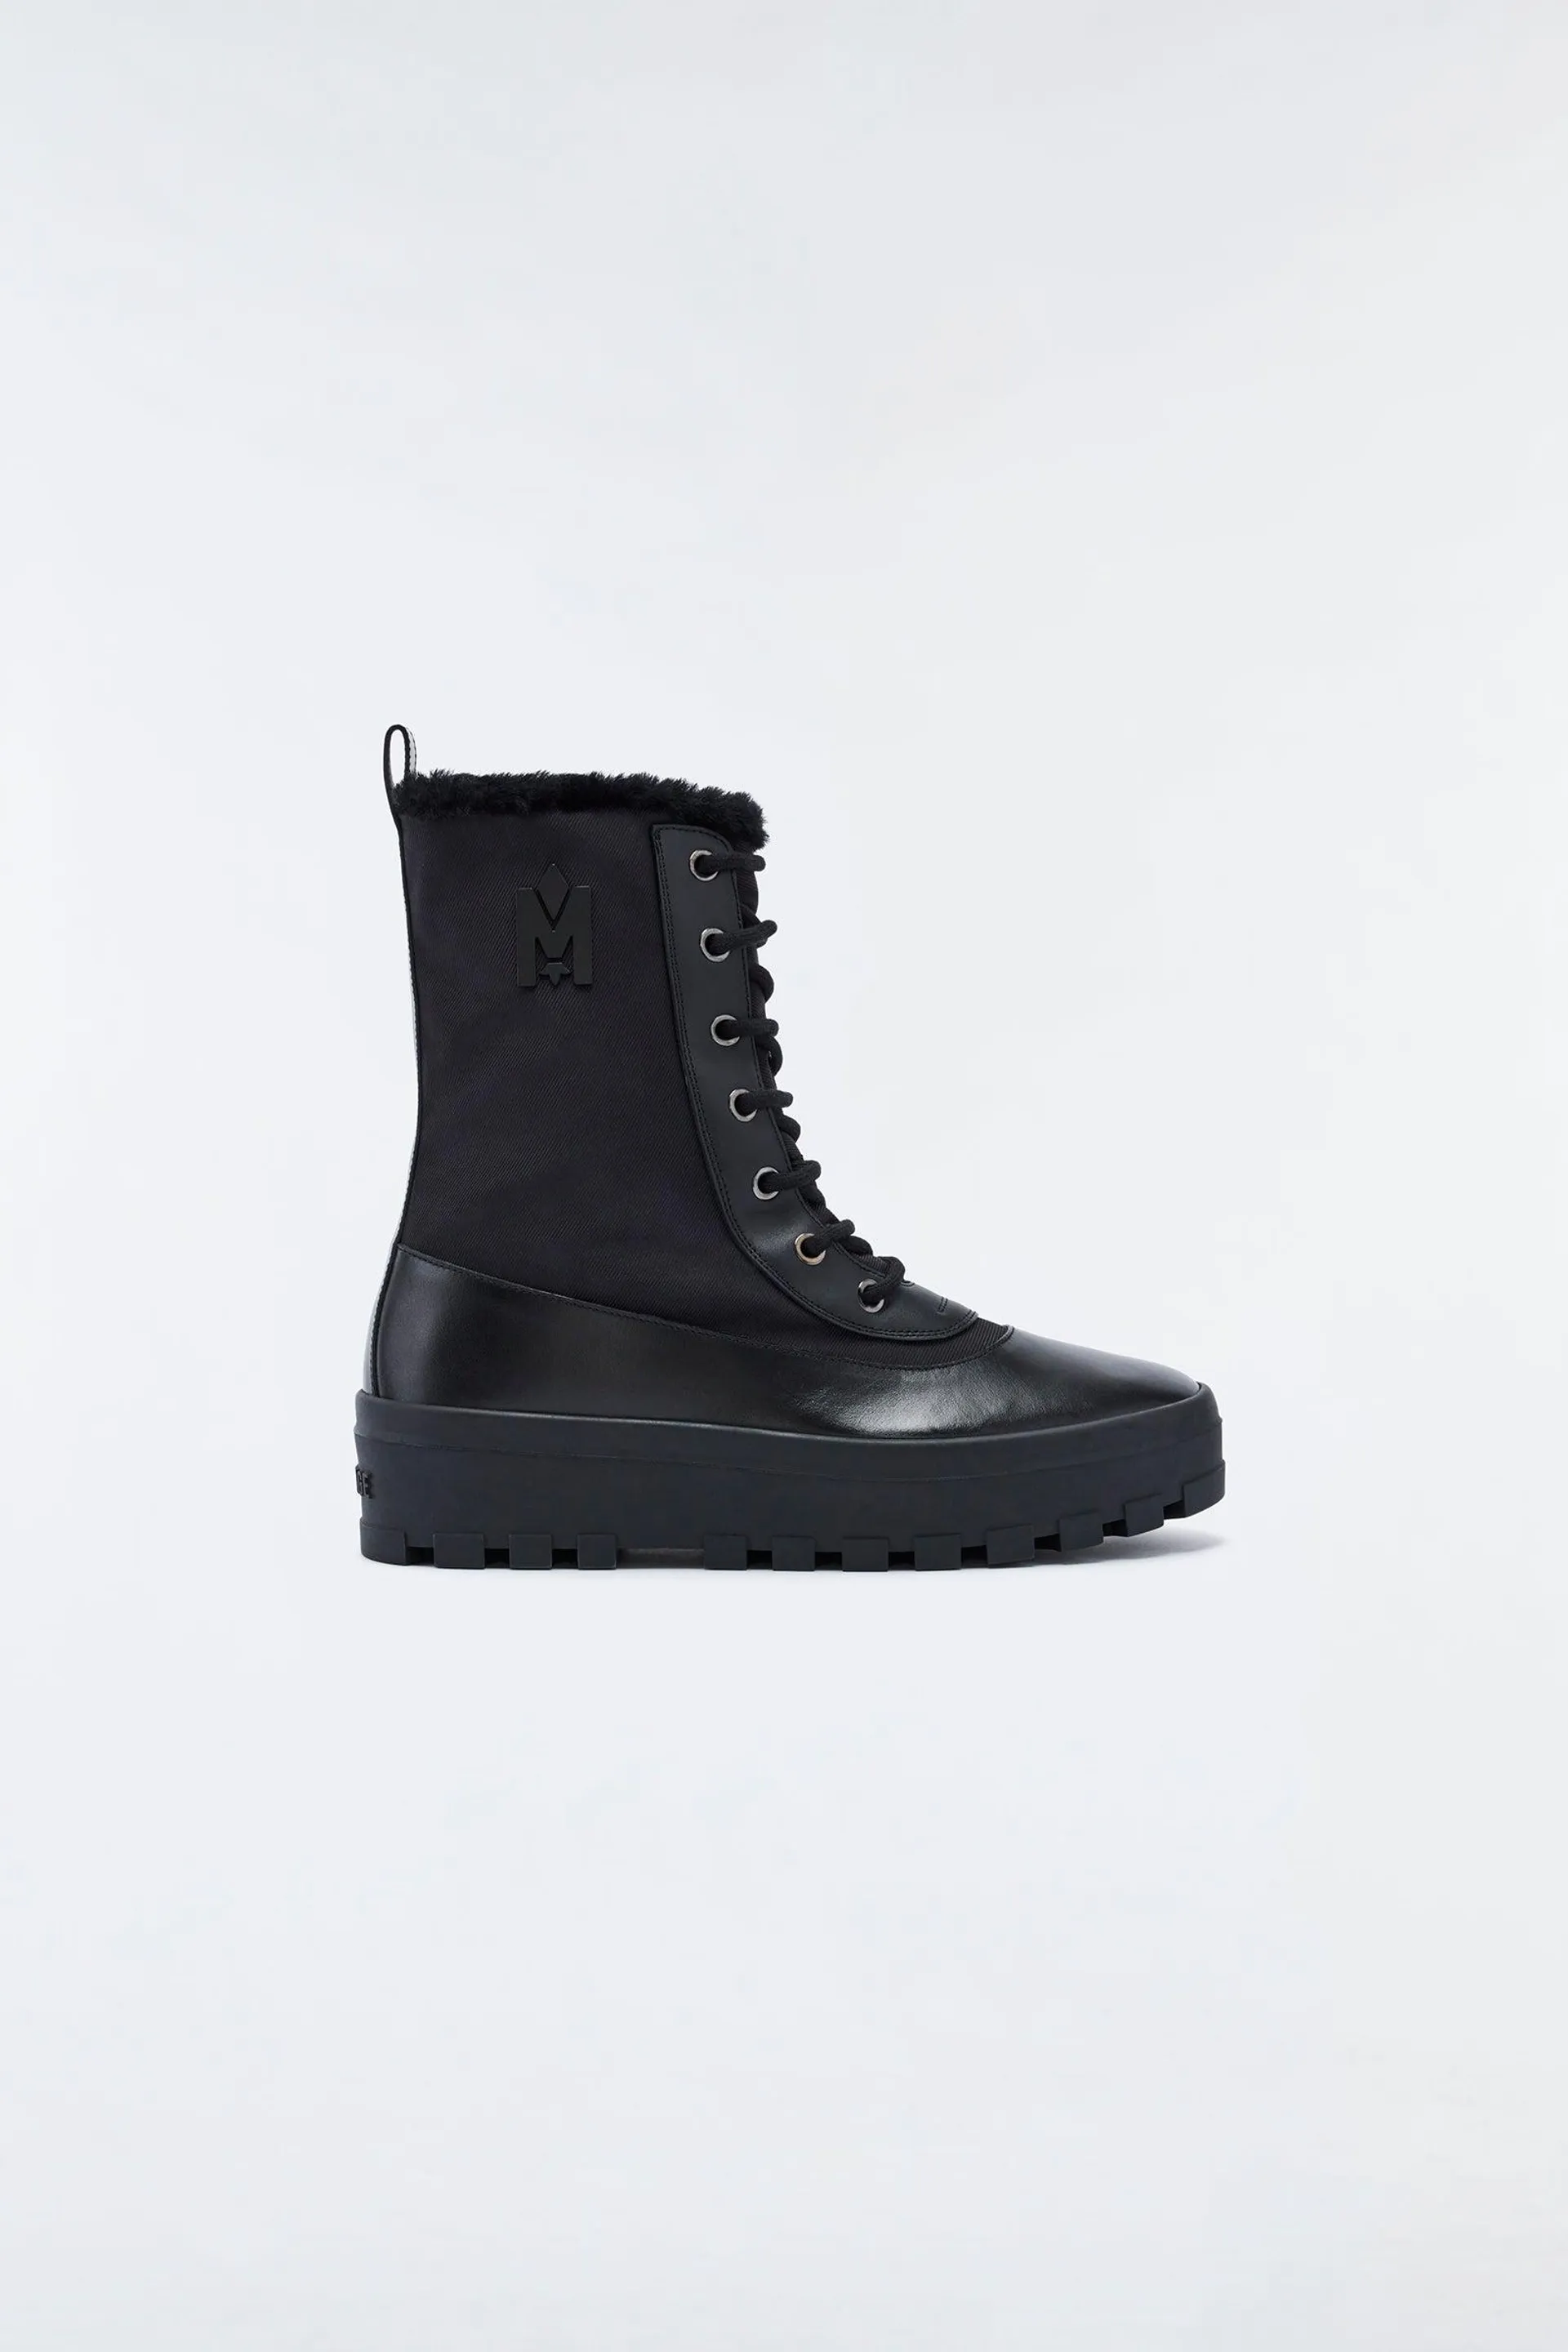 HERO shearling-lined winter boot for men